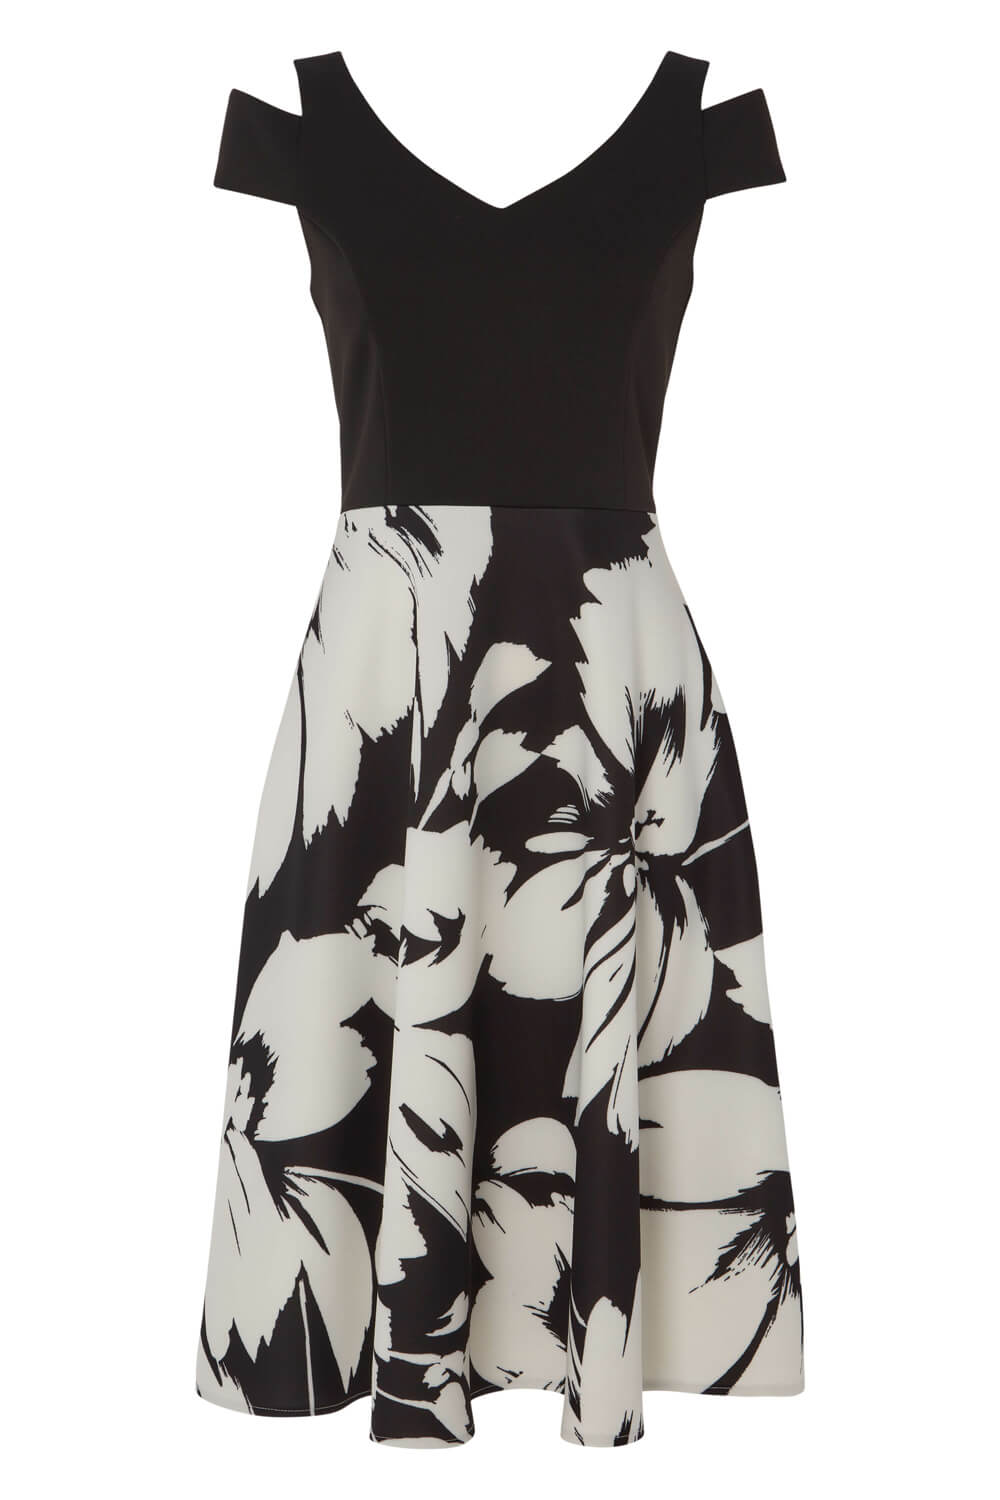 Black Fit and Flare Floral Scuba Dress, Image 3 of 3